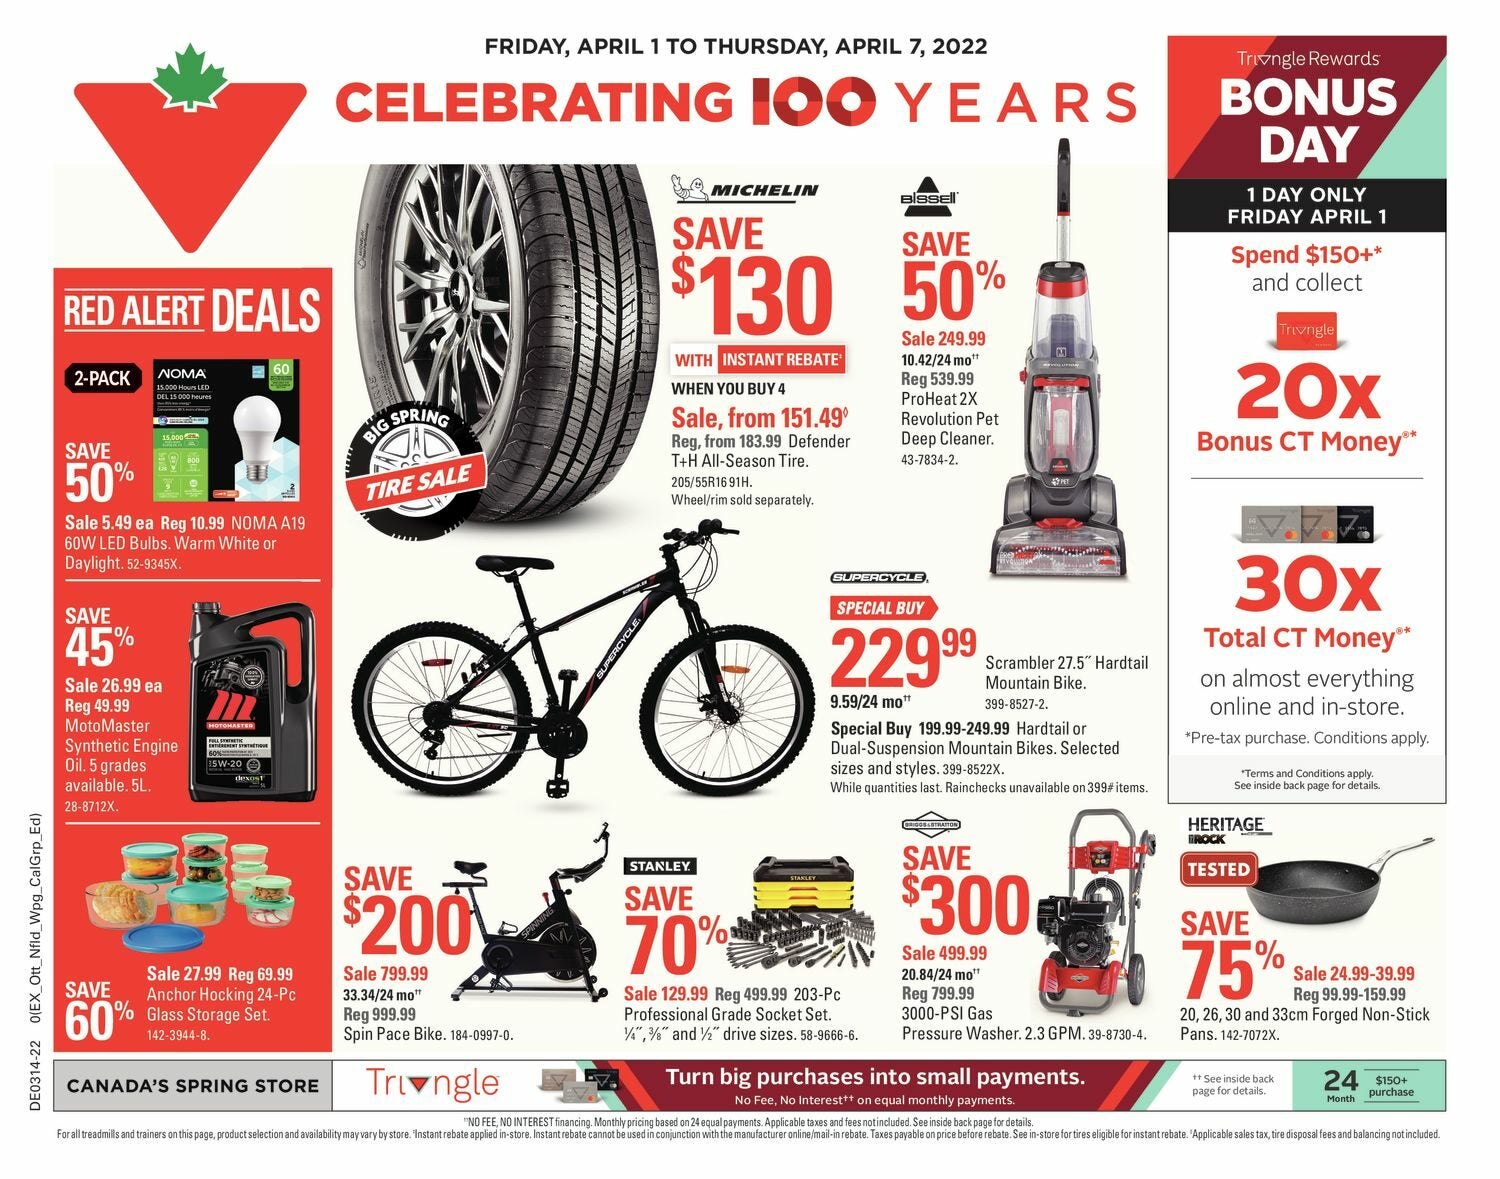 Canadian Tire Weekly Flyer - Weekly Deals - Celebrating 100 Years  (Toronto/GTA) - Apr 1 – 7 